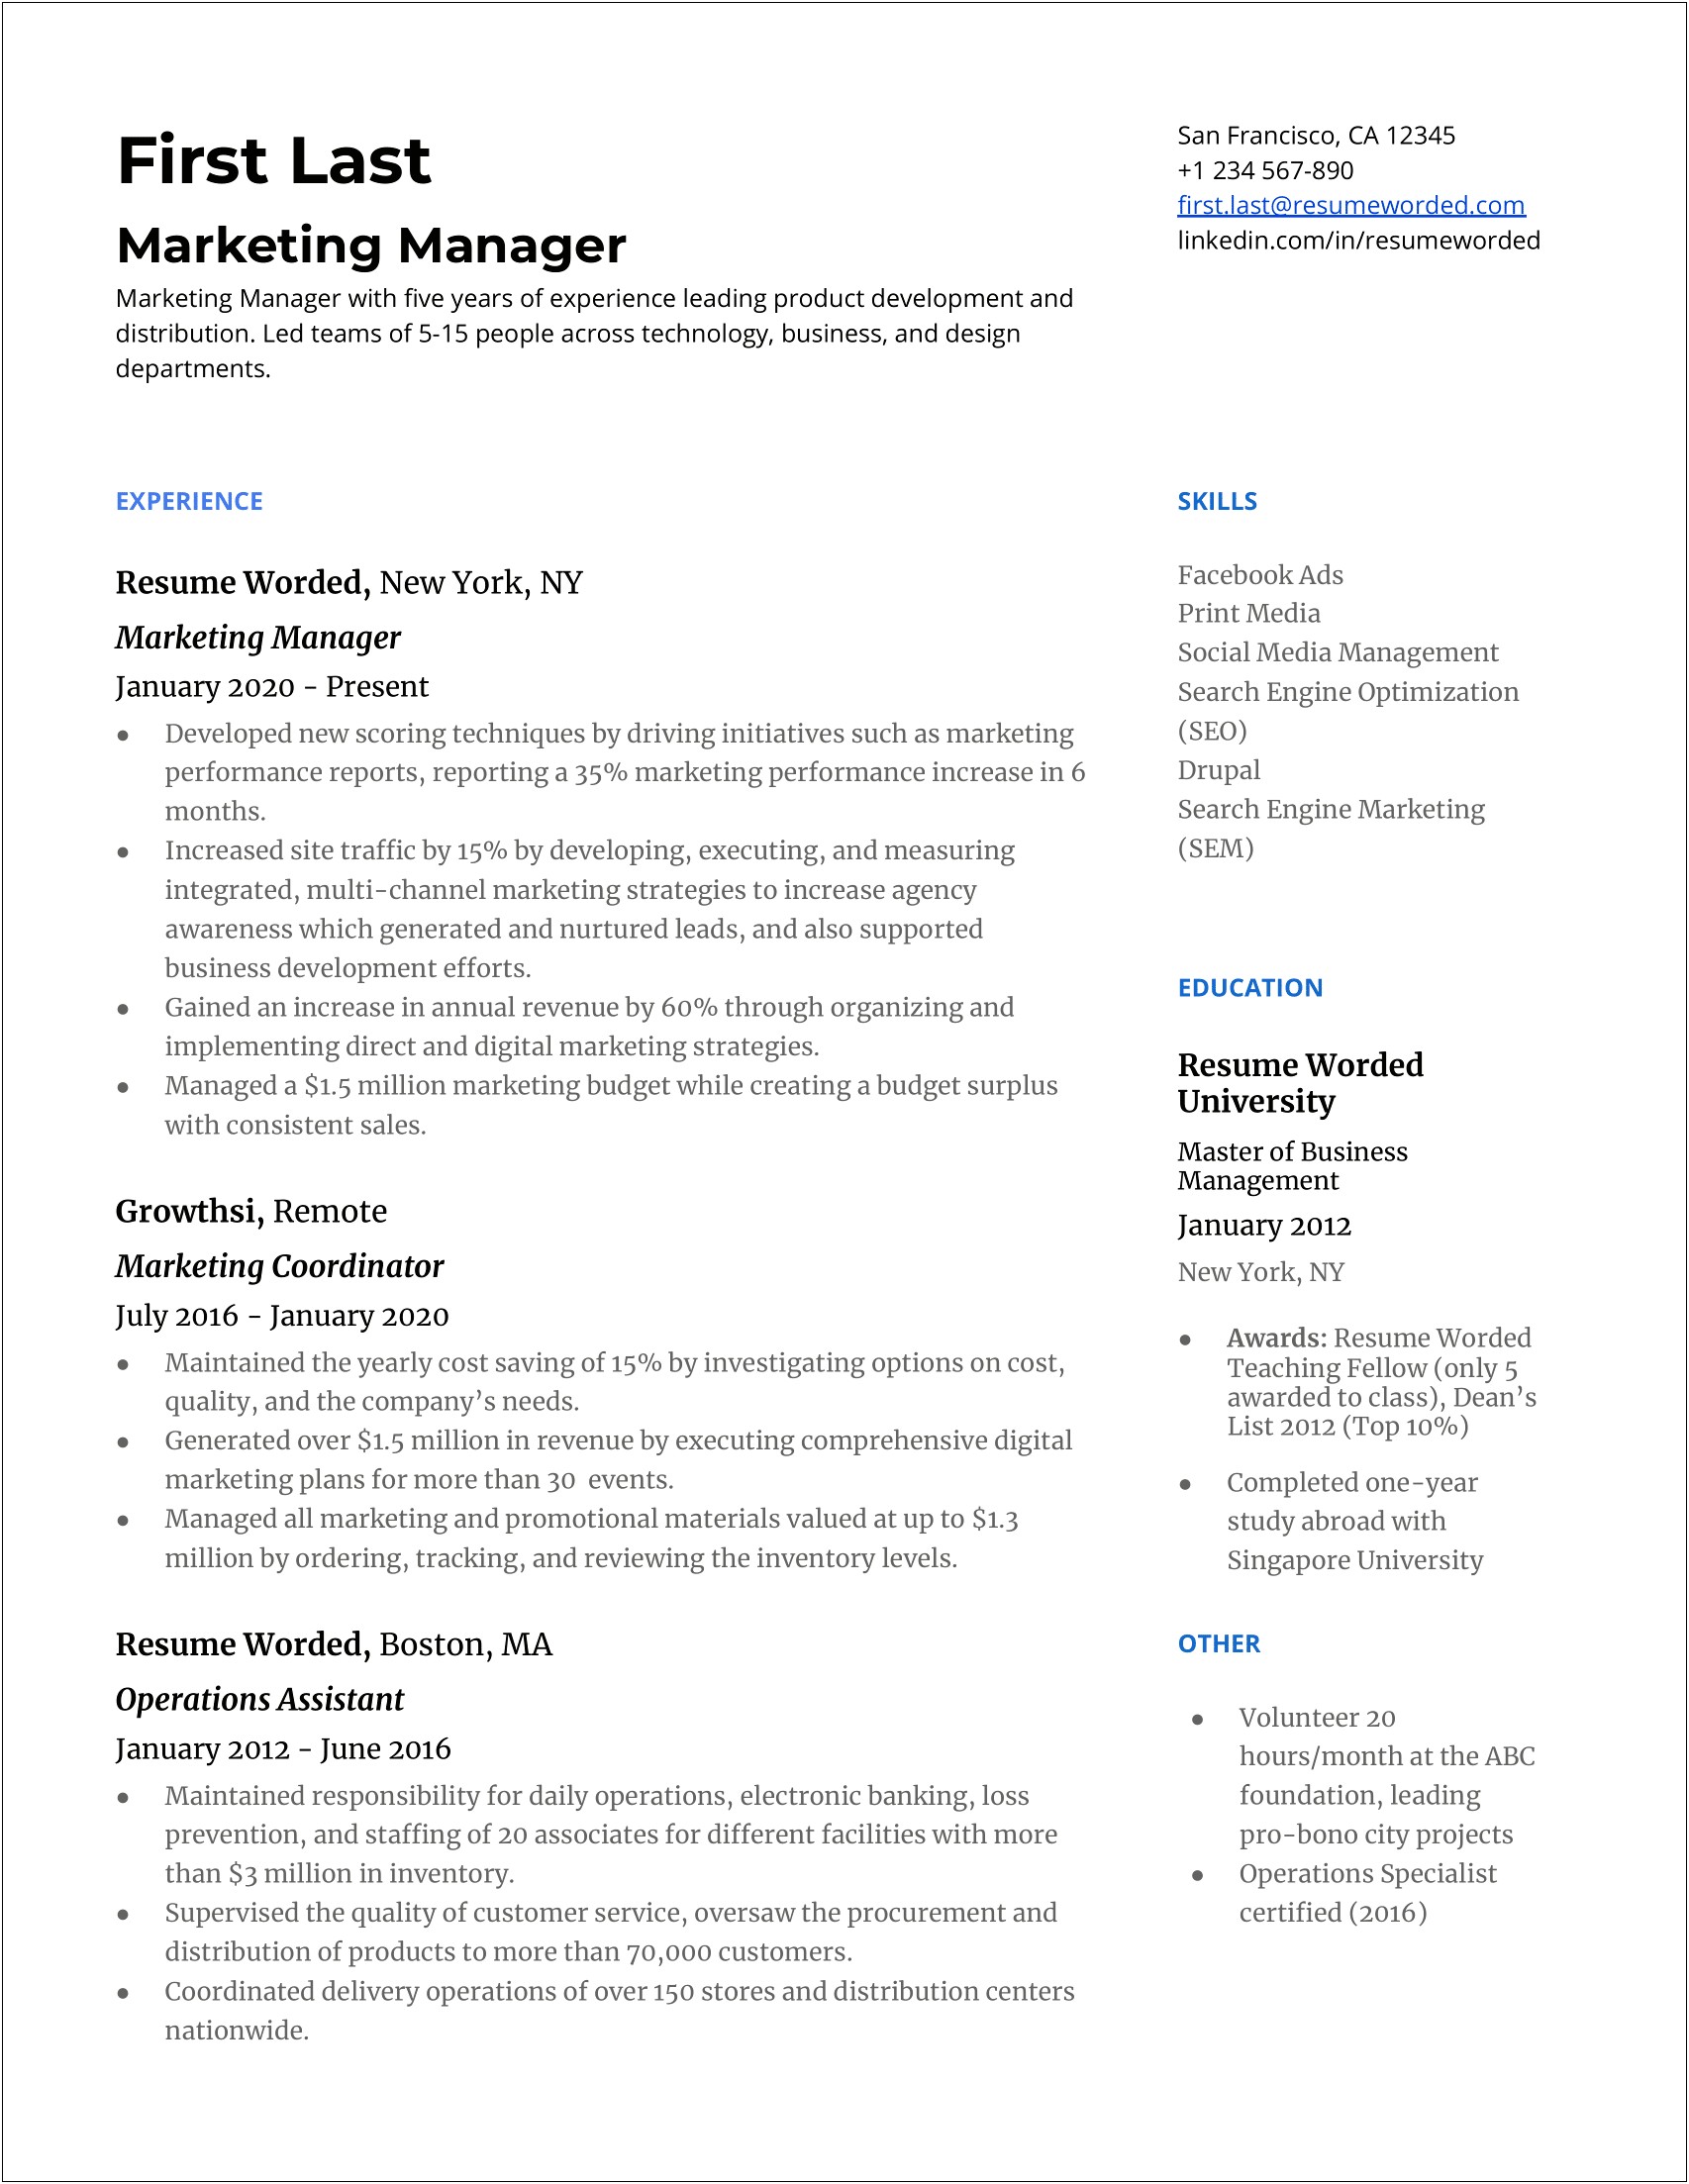 Resume Highlights Extensive Technical And Client Skills